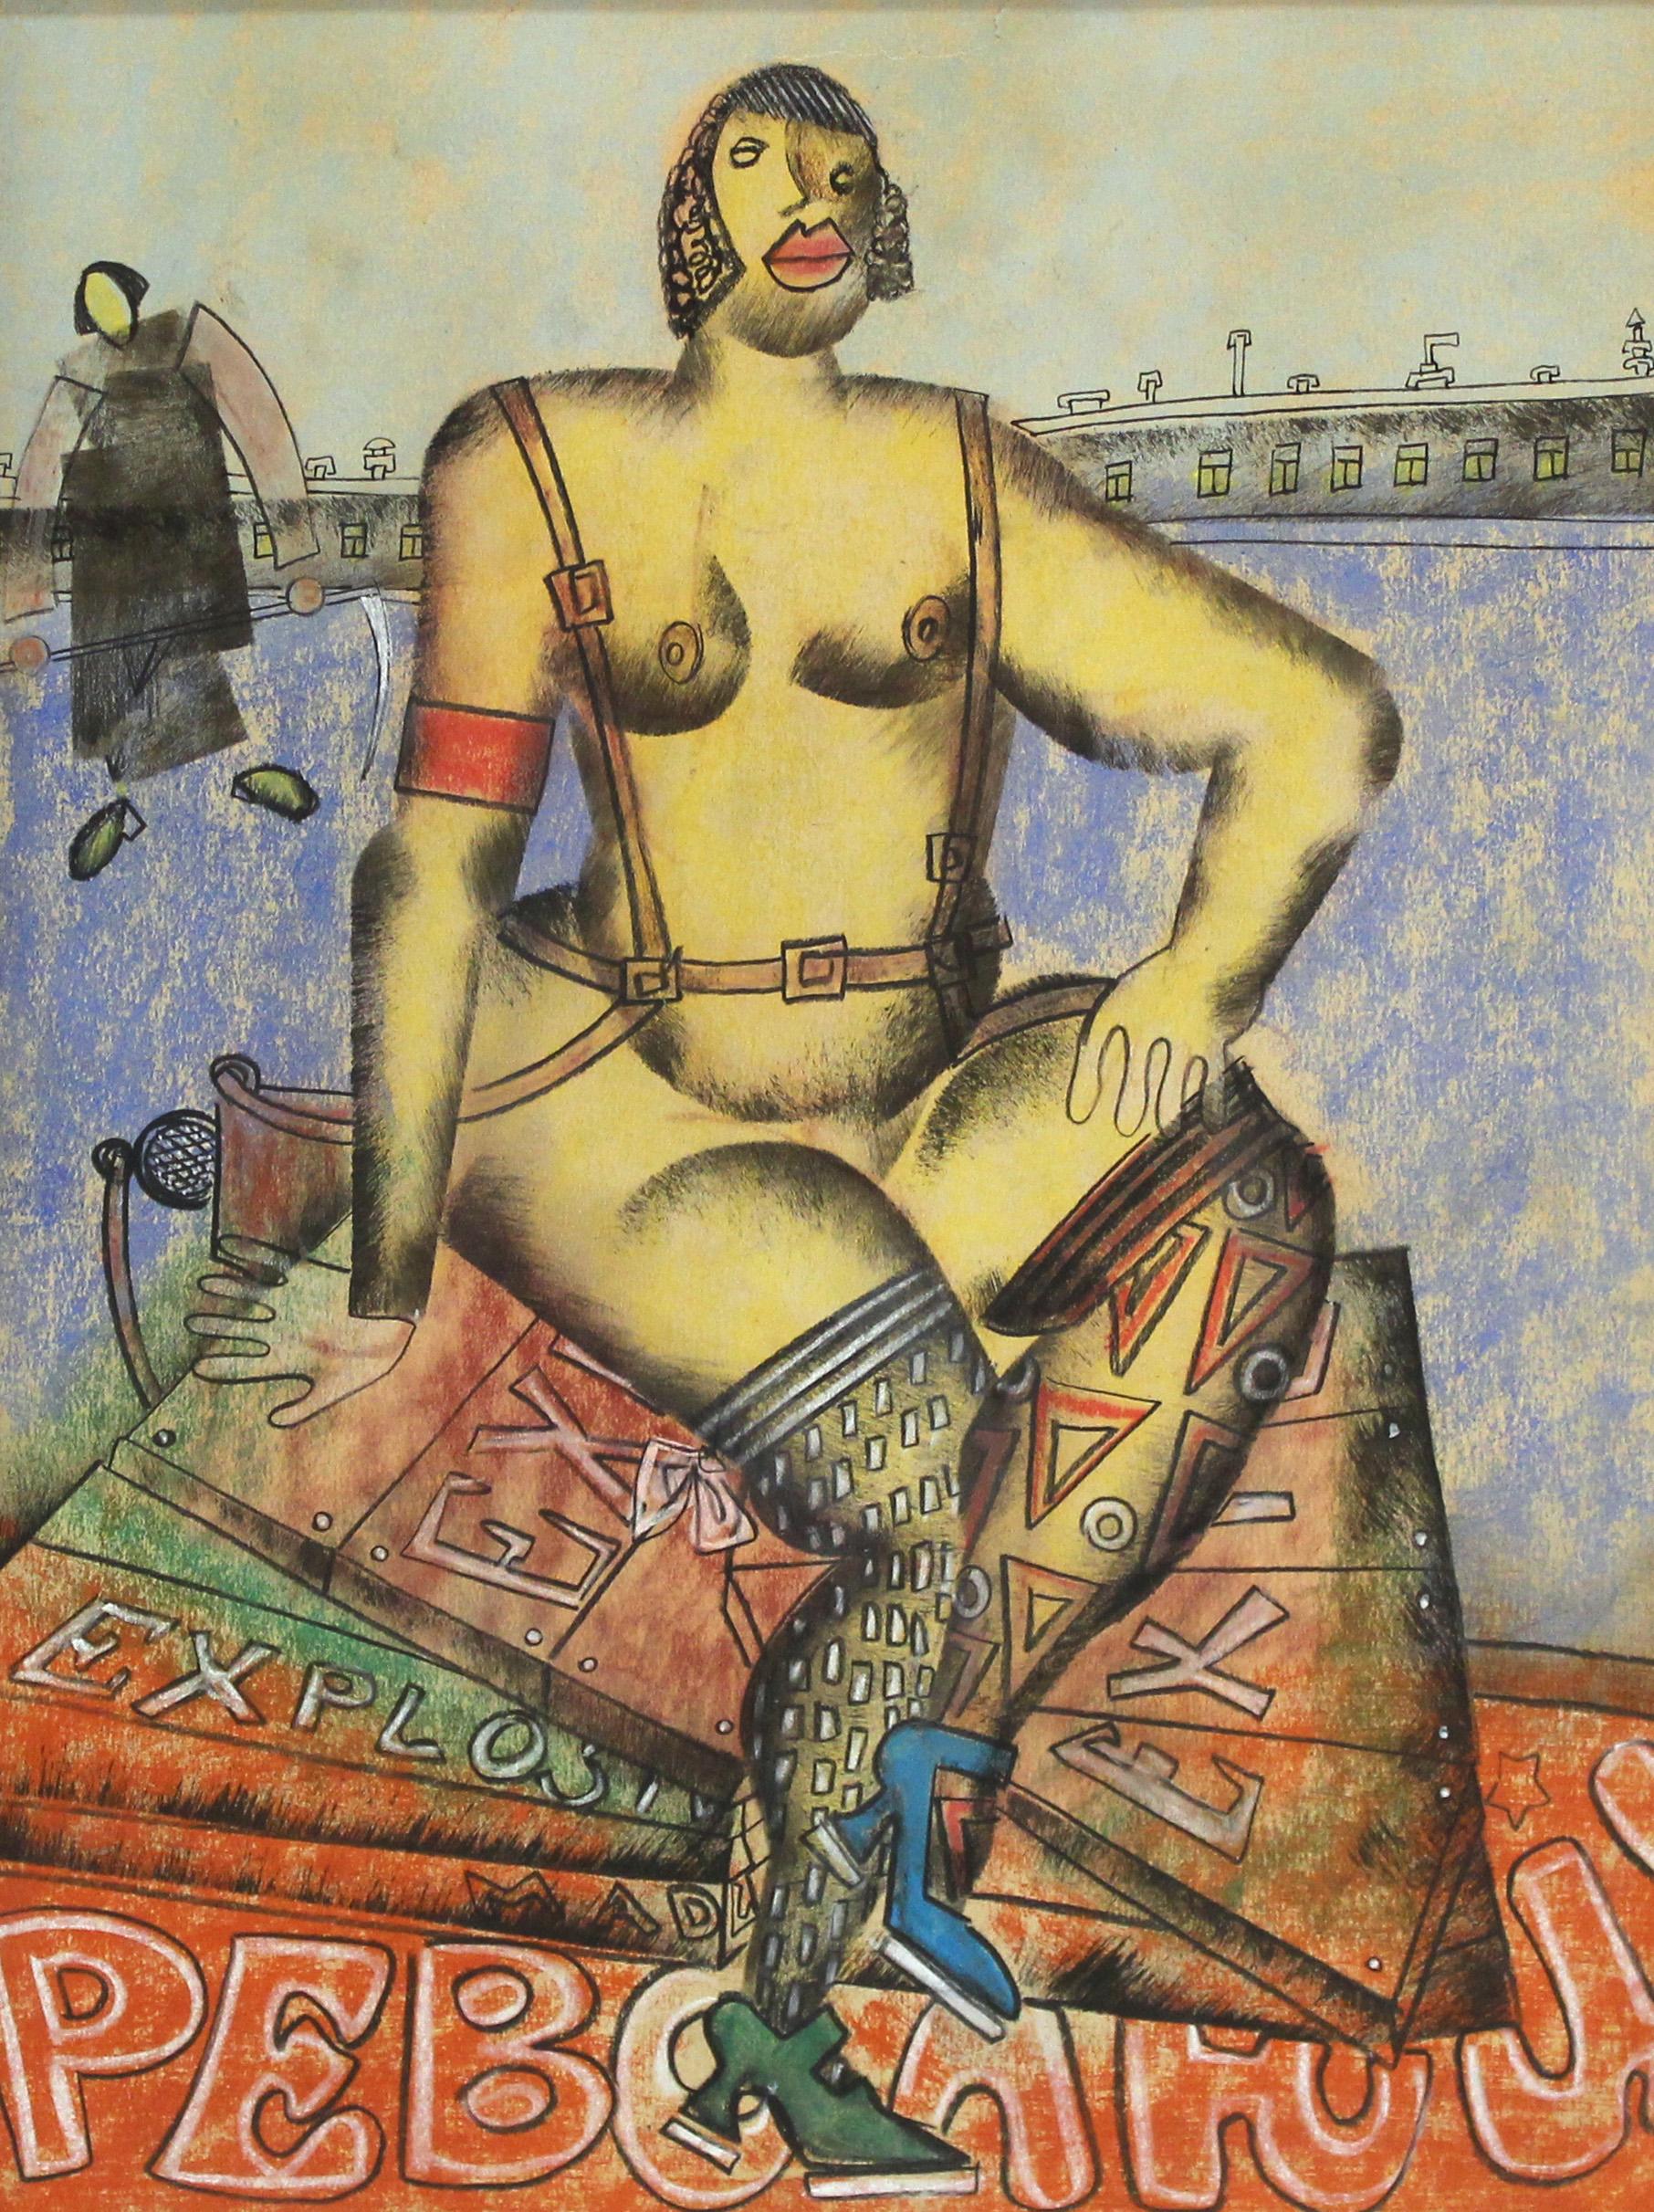 Vladimir Lebedev (1891 - 1967) Russian Avant-Garde mixed media work on paper (ink, gouache, pencil) depicting a seated nude working girl. The piece includes visible elements of Bolshevik propaganda and was created by Lebedev during the early 1920's